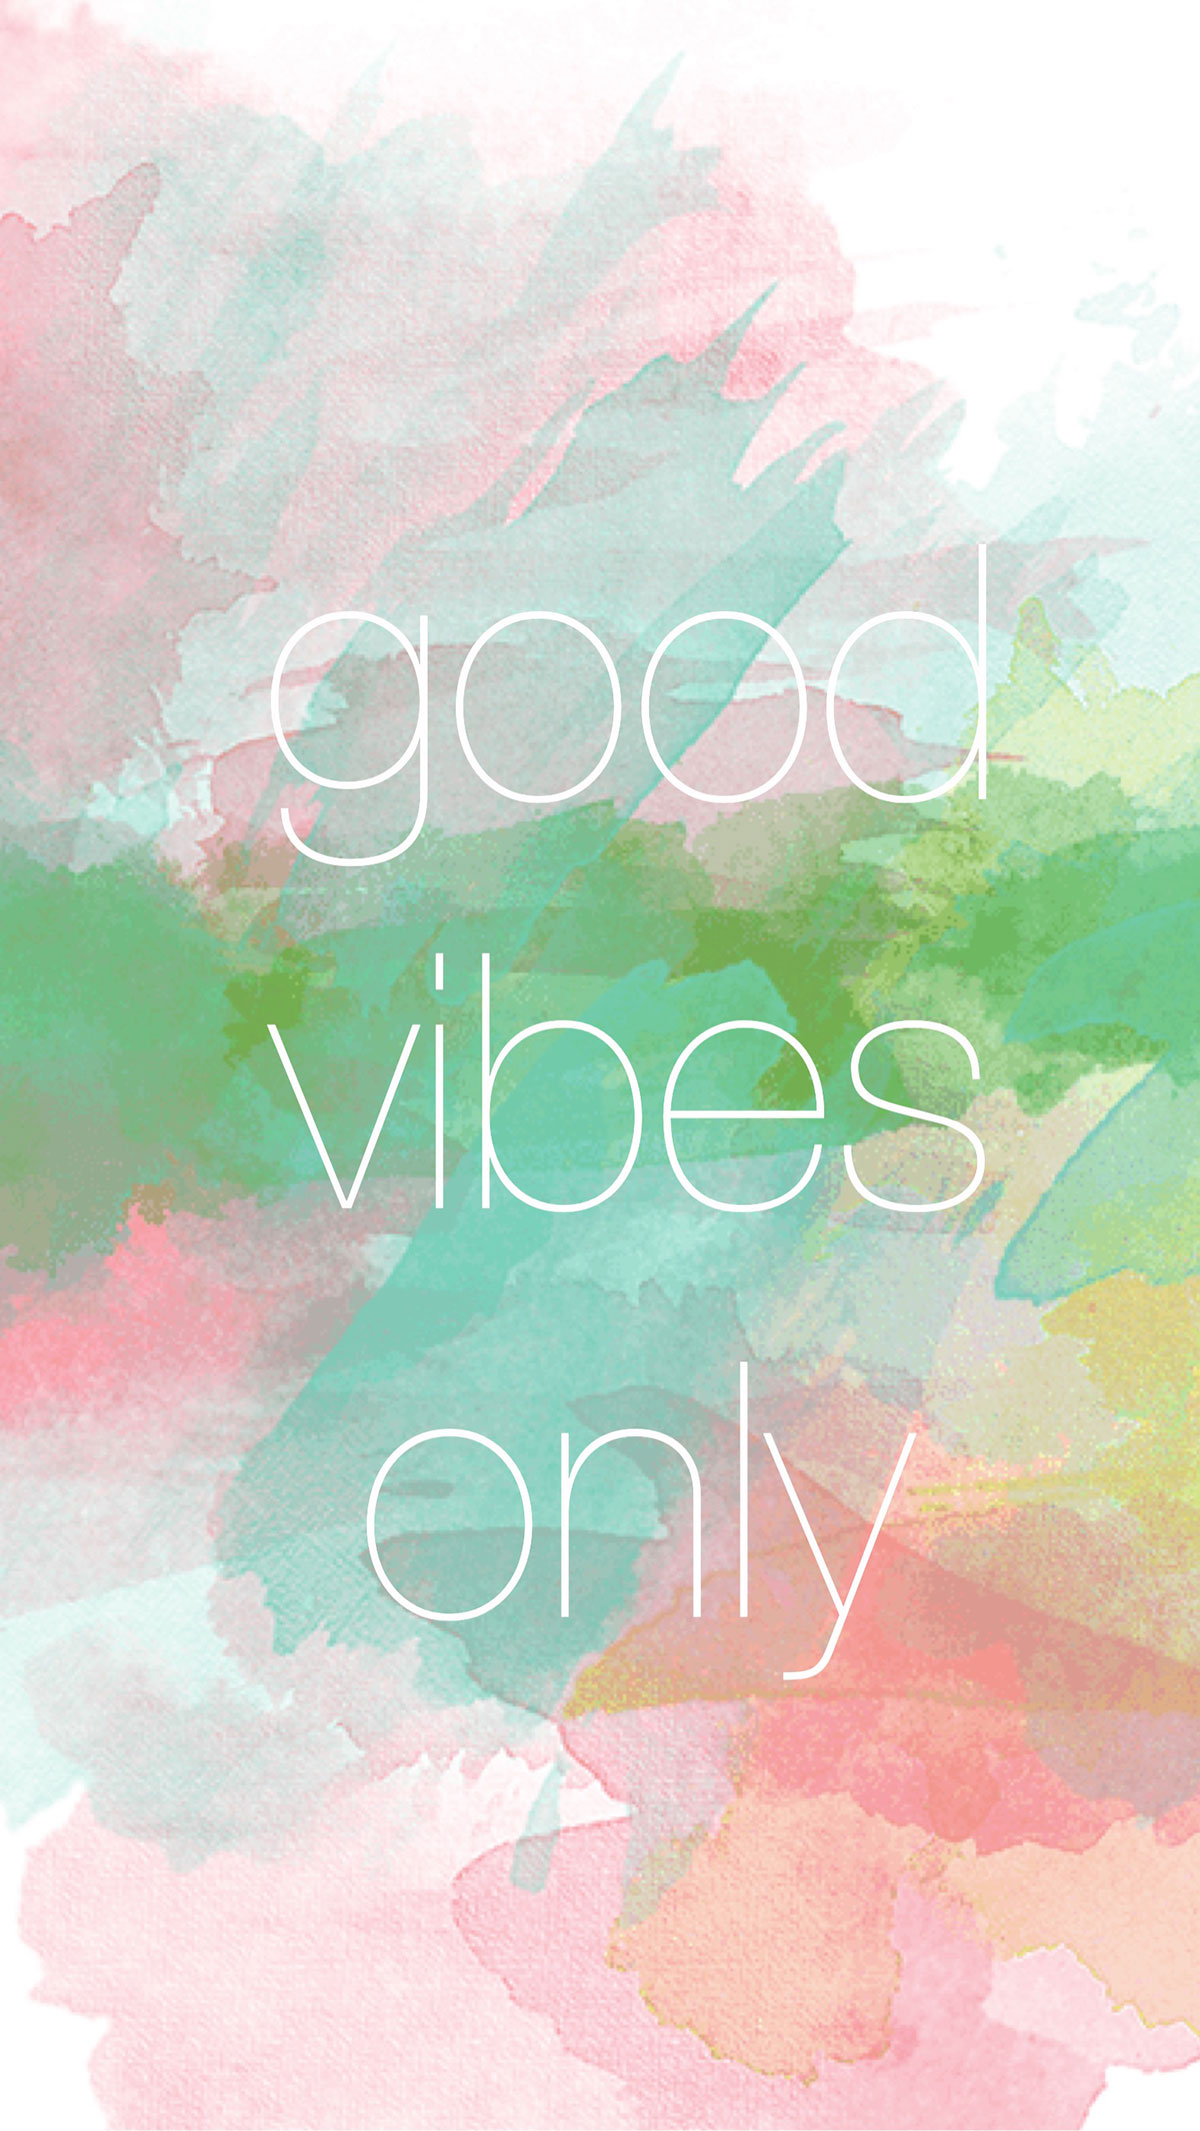 Iphone Wallpapers Free Downloads - Good Vibes Wallpaper Iphone , HD Wallpaper & Backgrounds